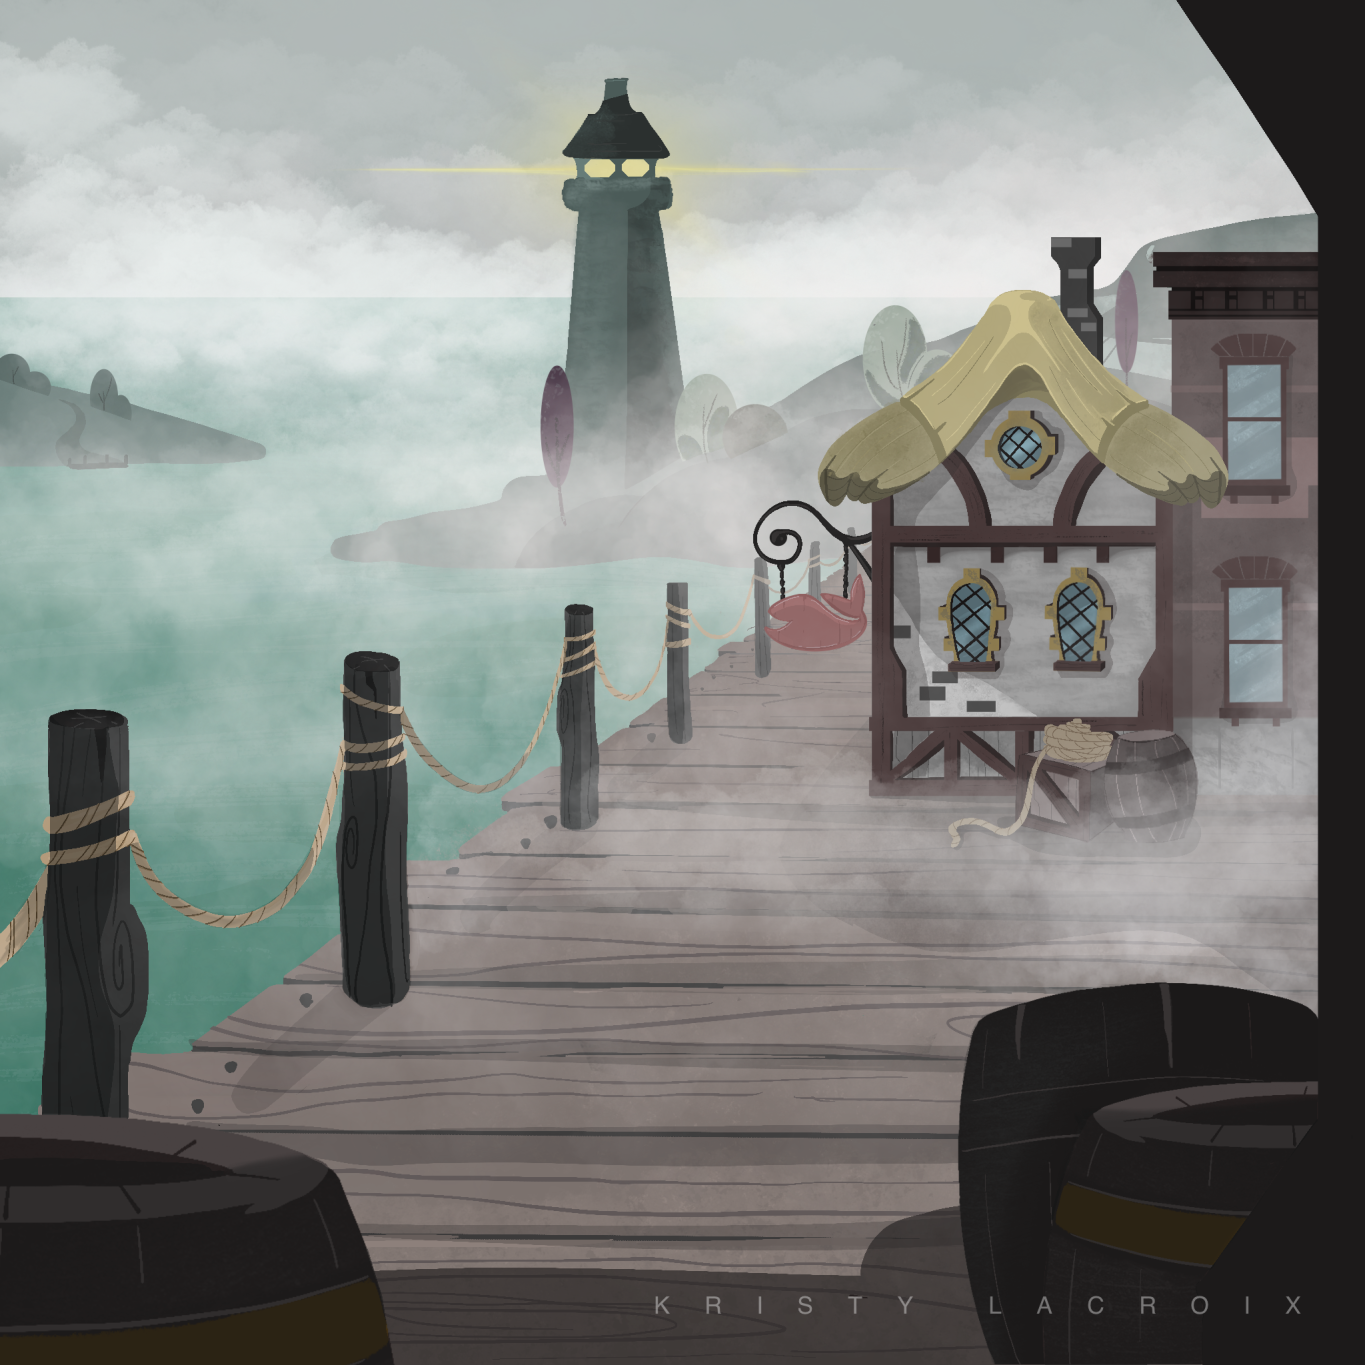 A depiction of a boardwalk with quaint rustic buildings and a lighthouse in the background. Mist rolls over the scene.